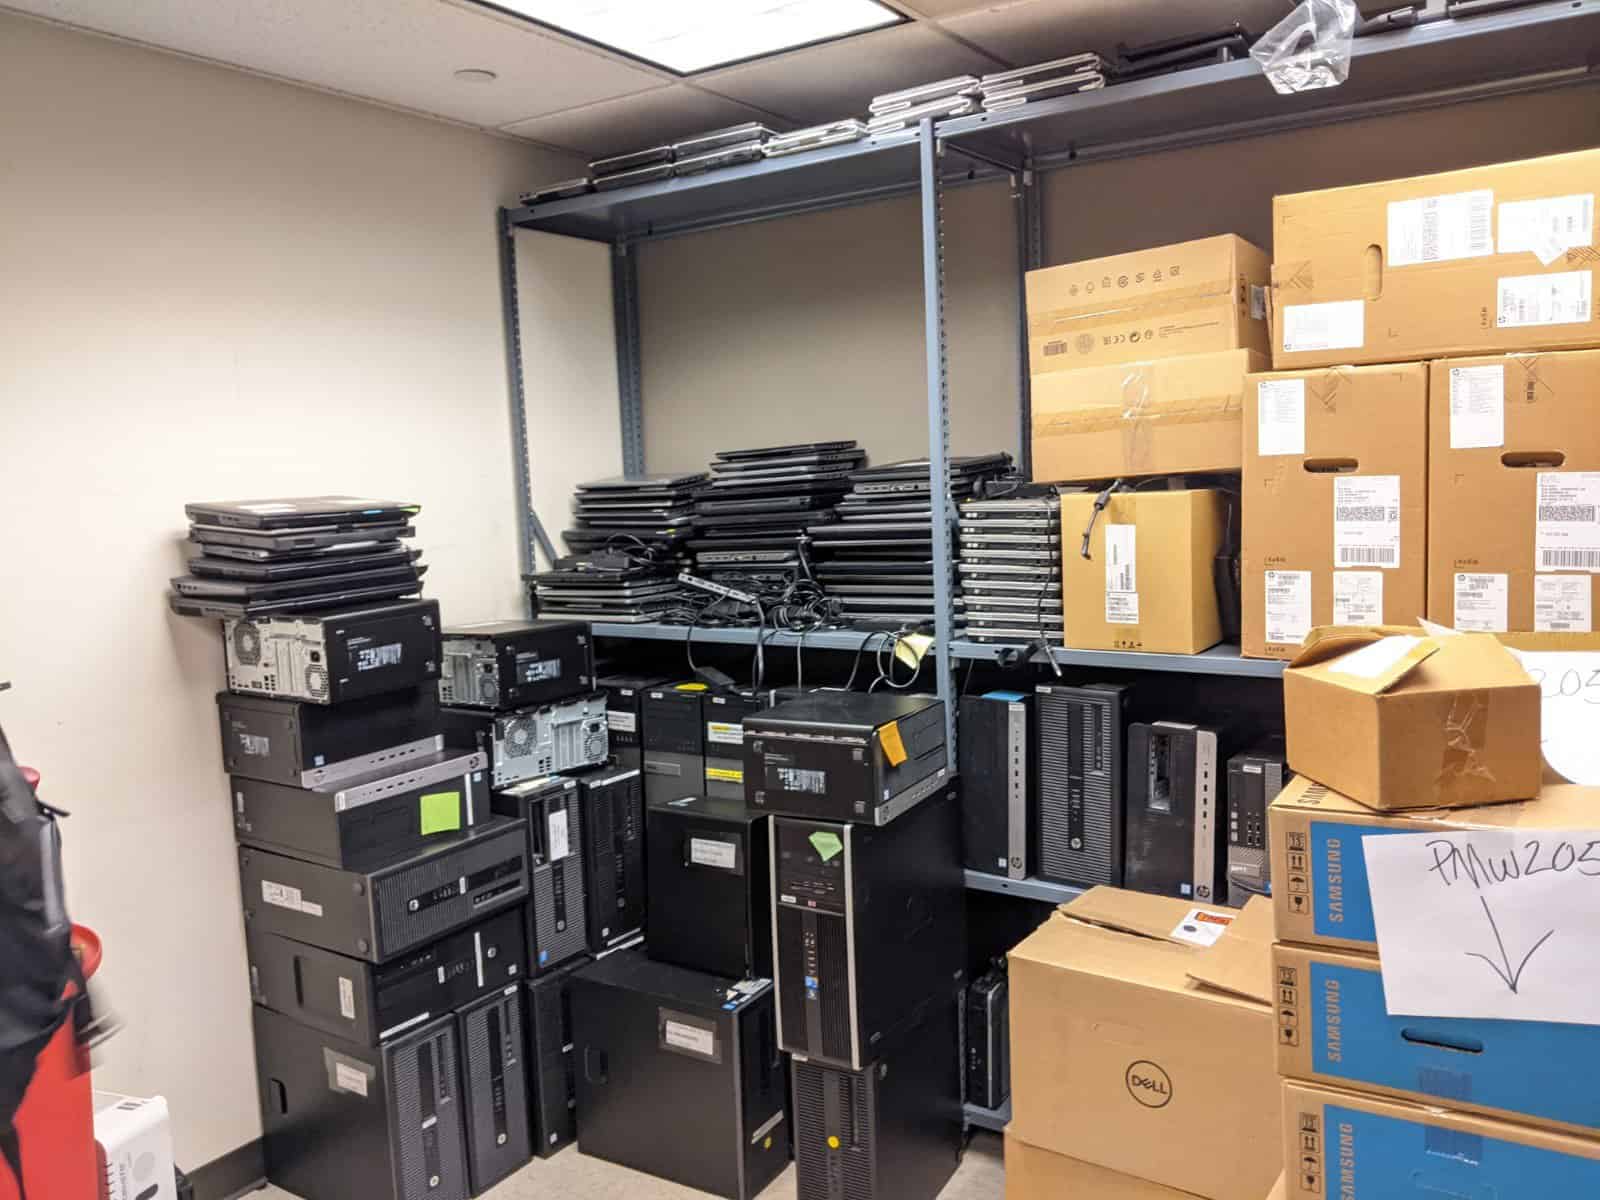 A room full of computer equipment and boxes.